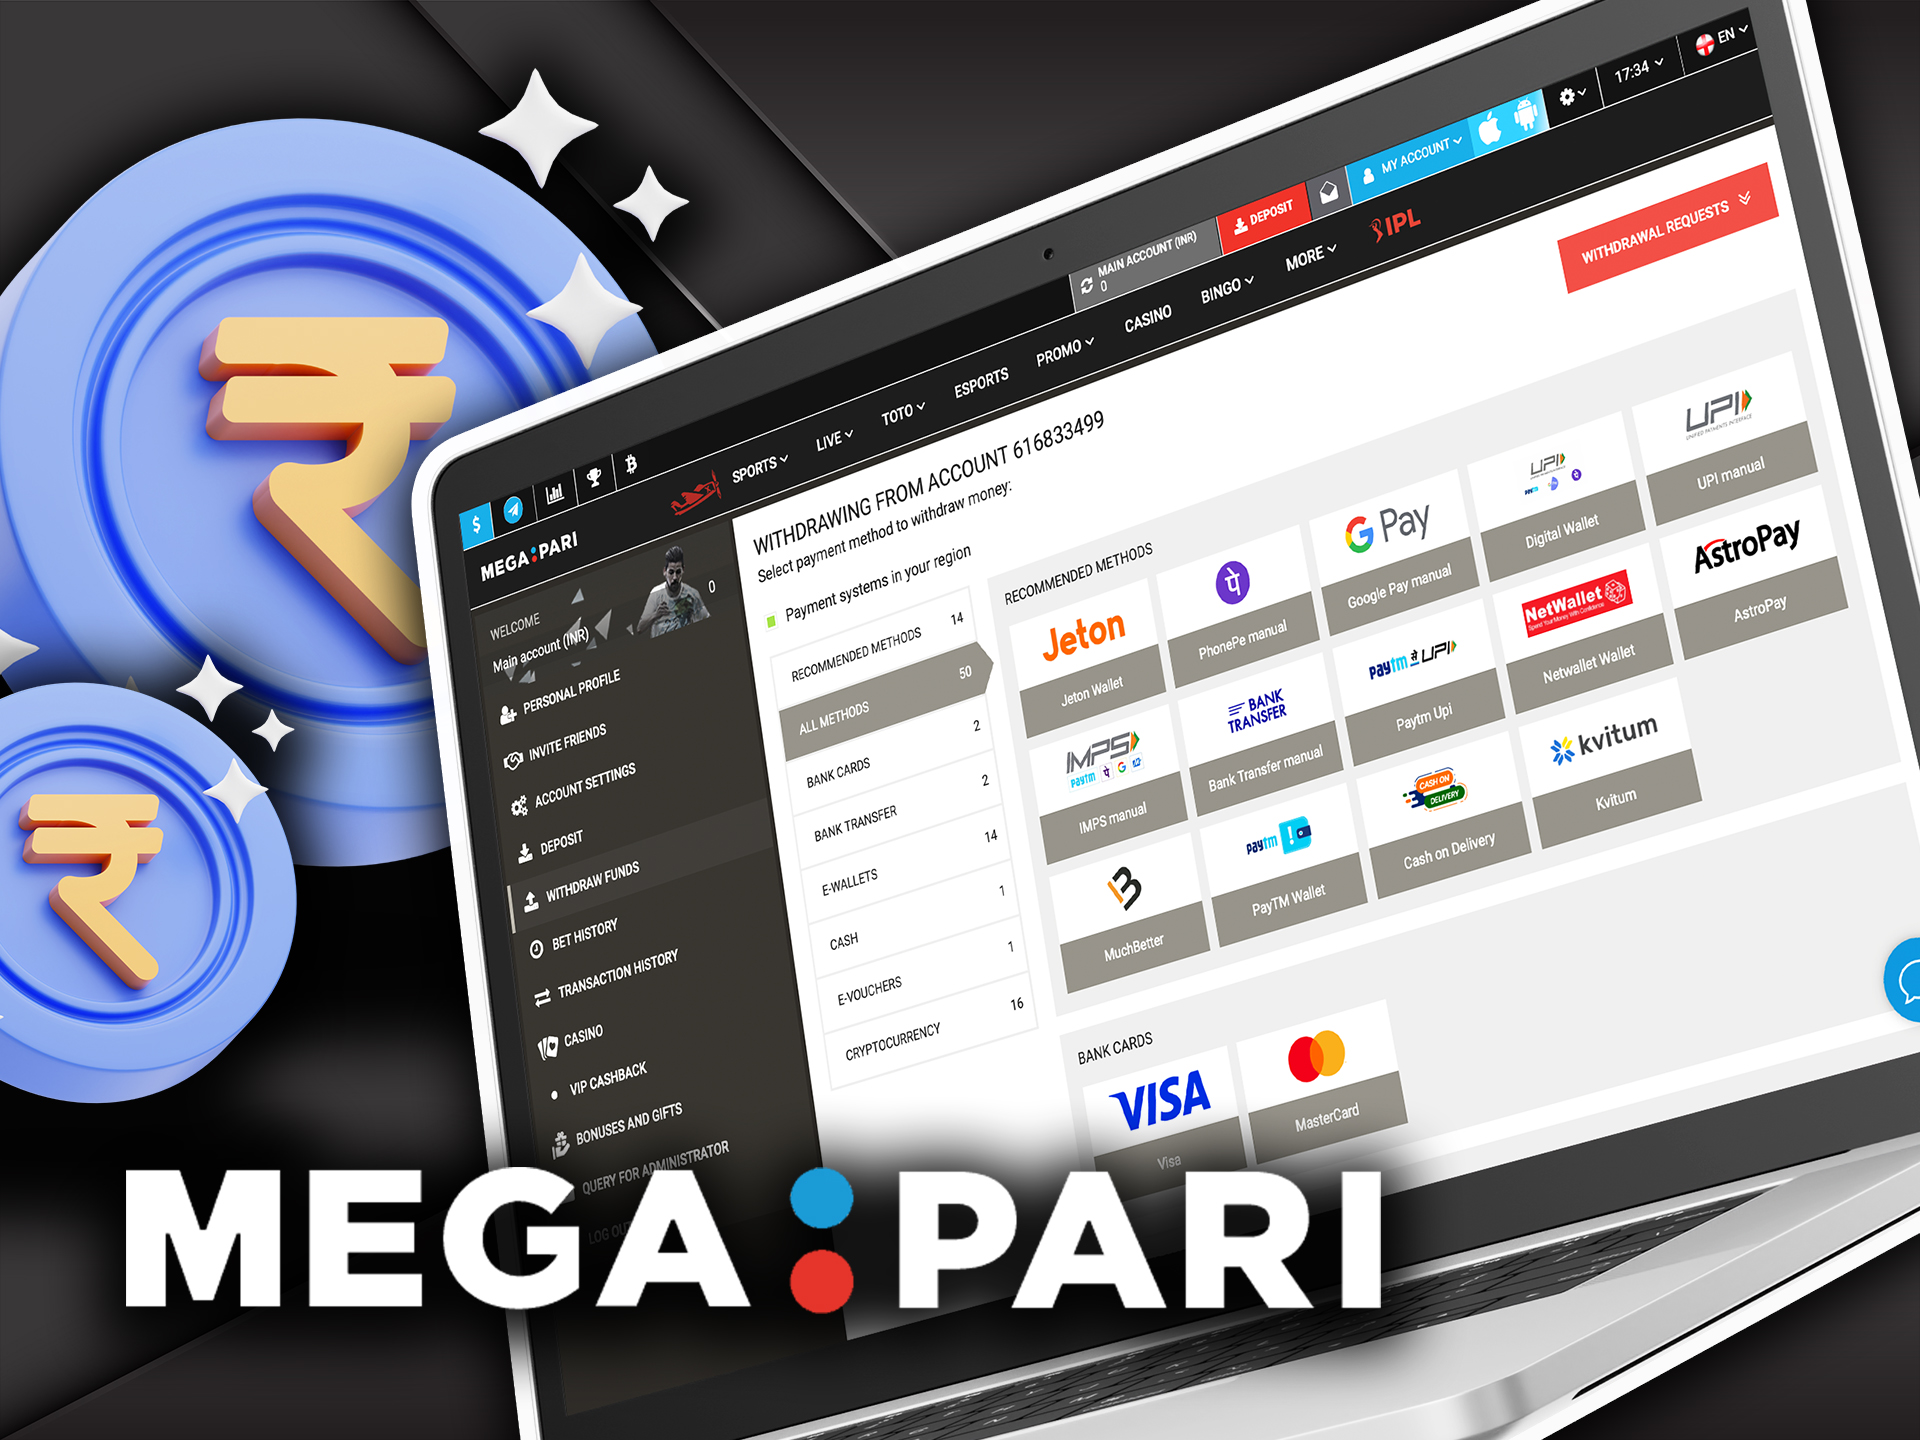 Withdraw money without problems at Megapari.